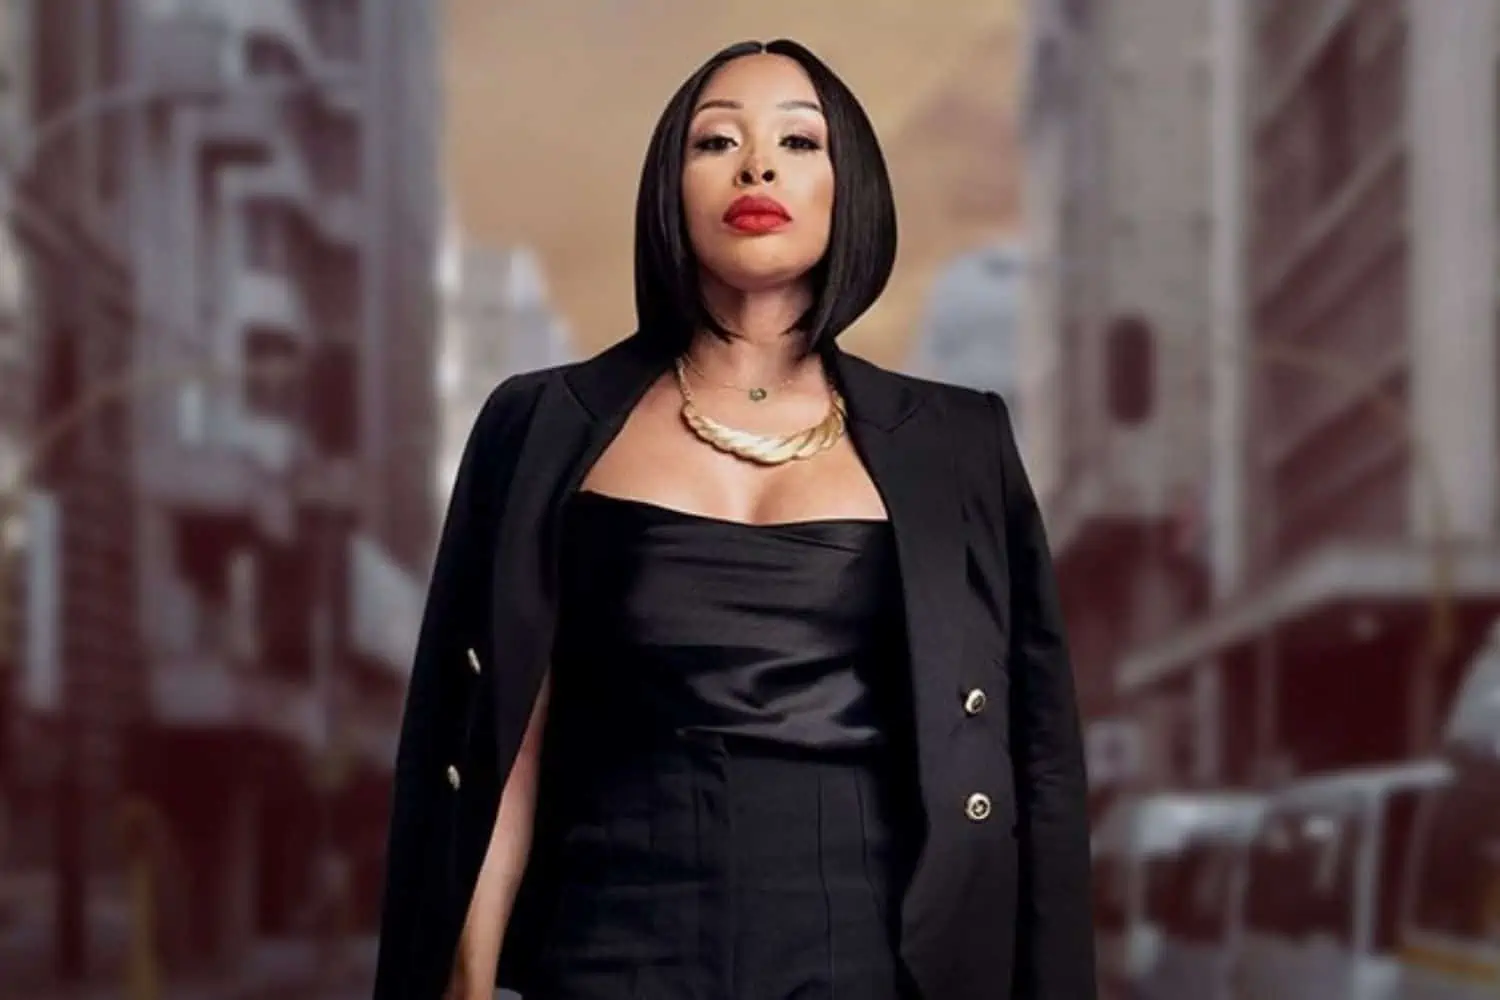 Mzansi can't get over Khanyi Mbau's perfect portrayal in "The Wife"